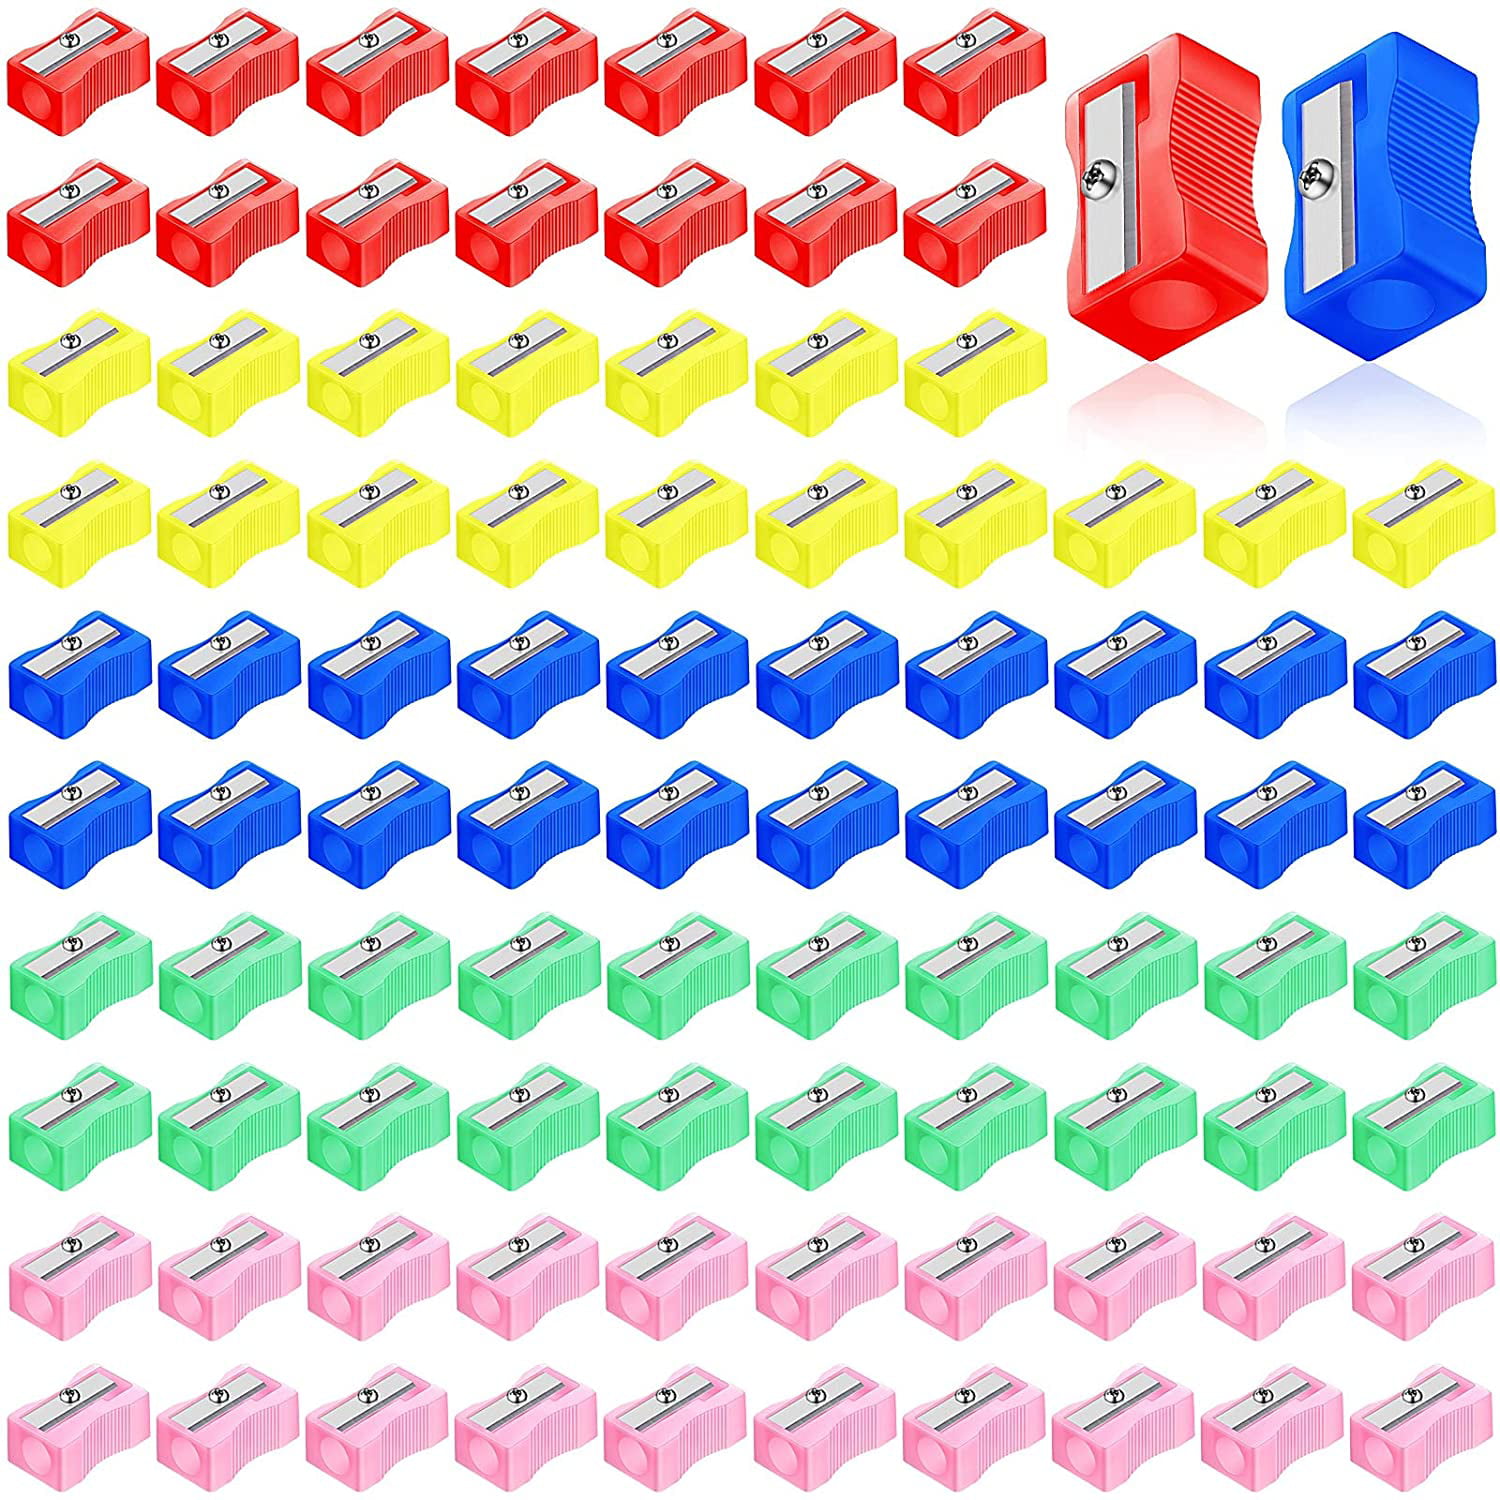 100 Pack Mini Pencil Sharpeners Assorted Colors Pocket Size Pencil Sharpeners... 